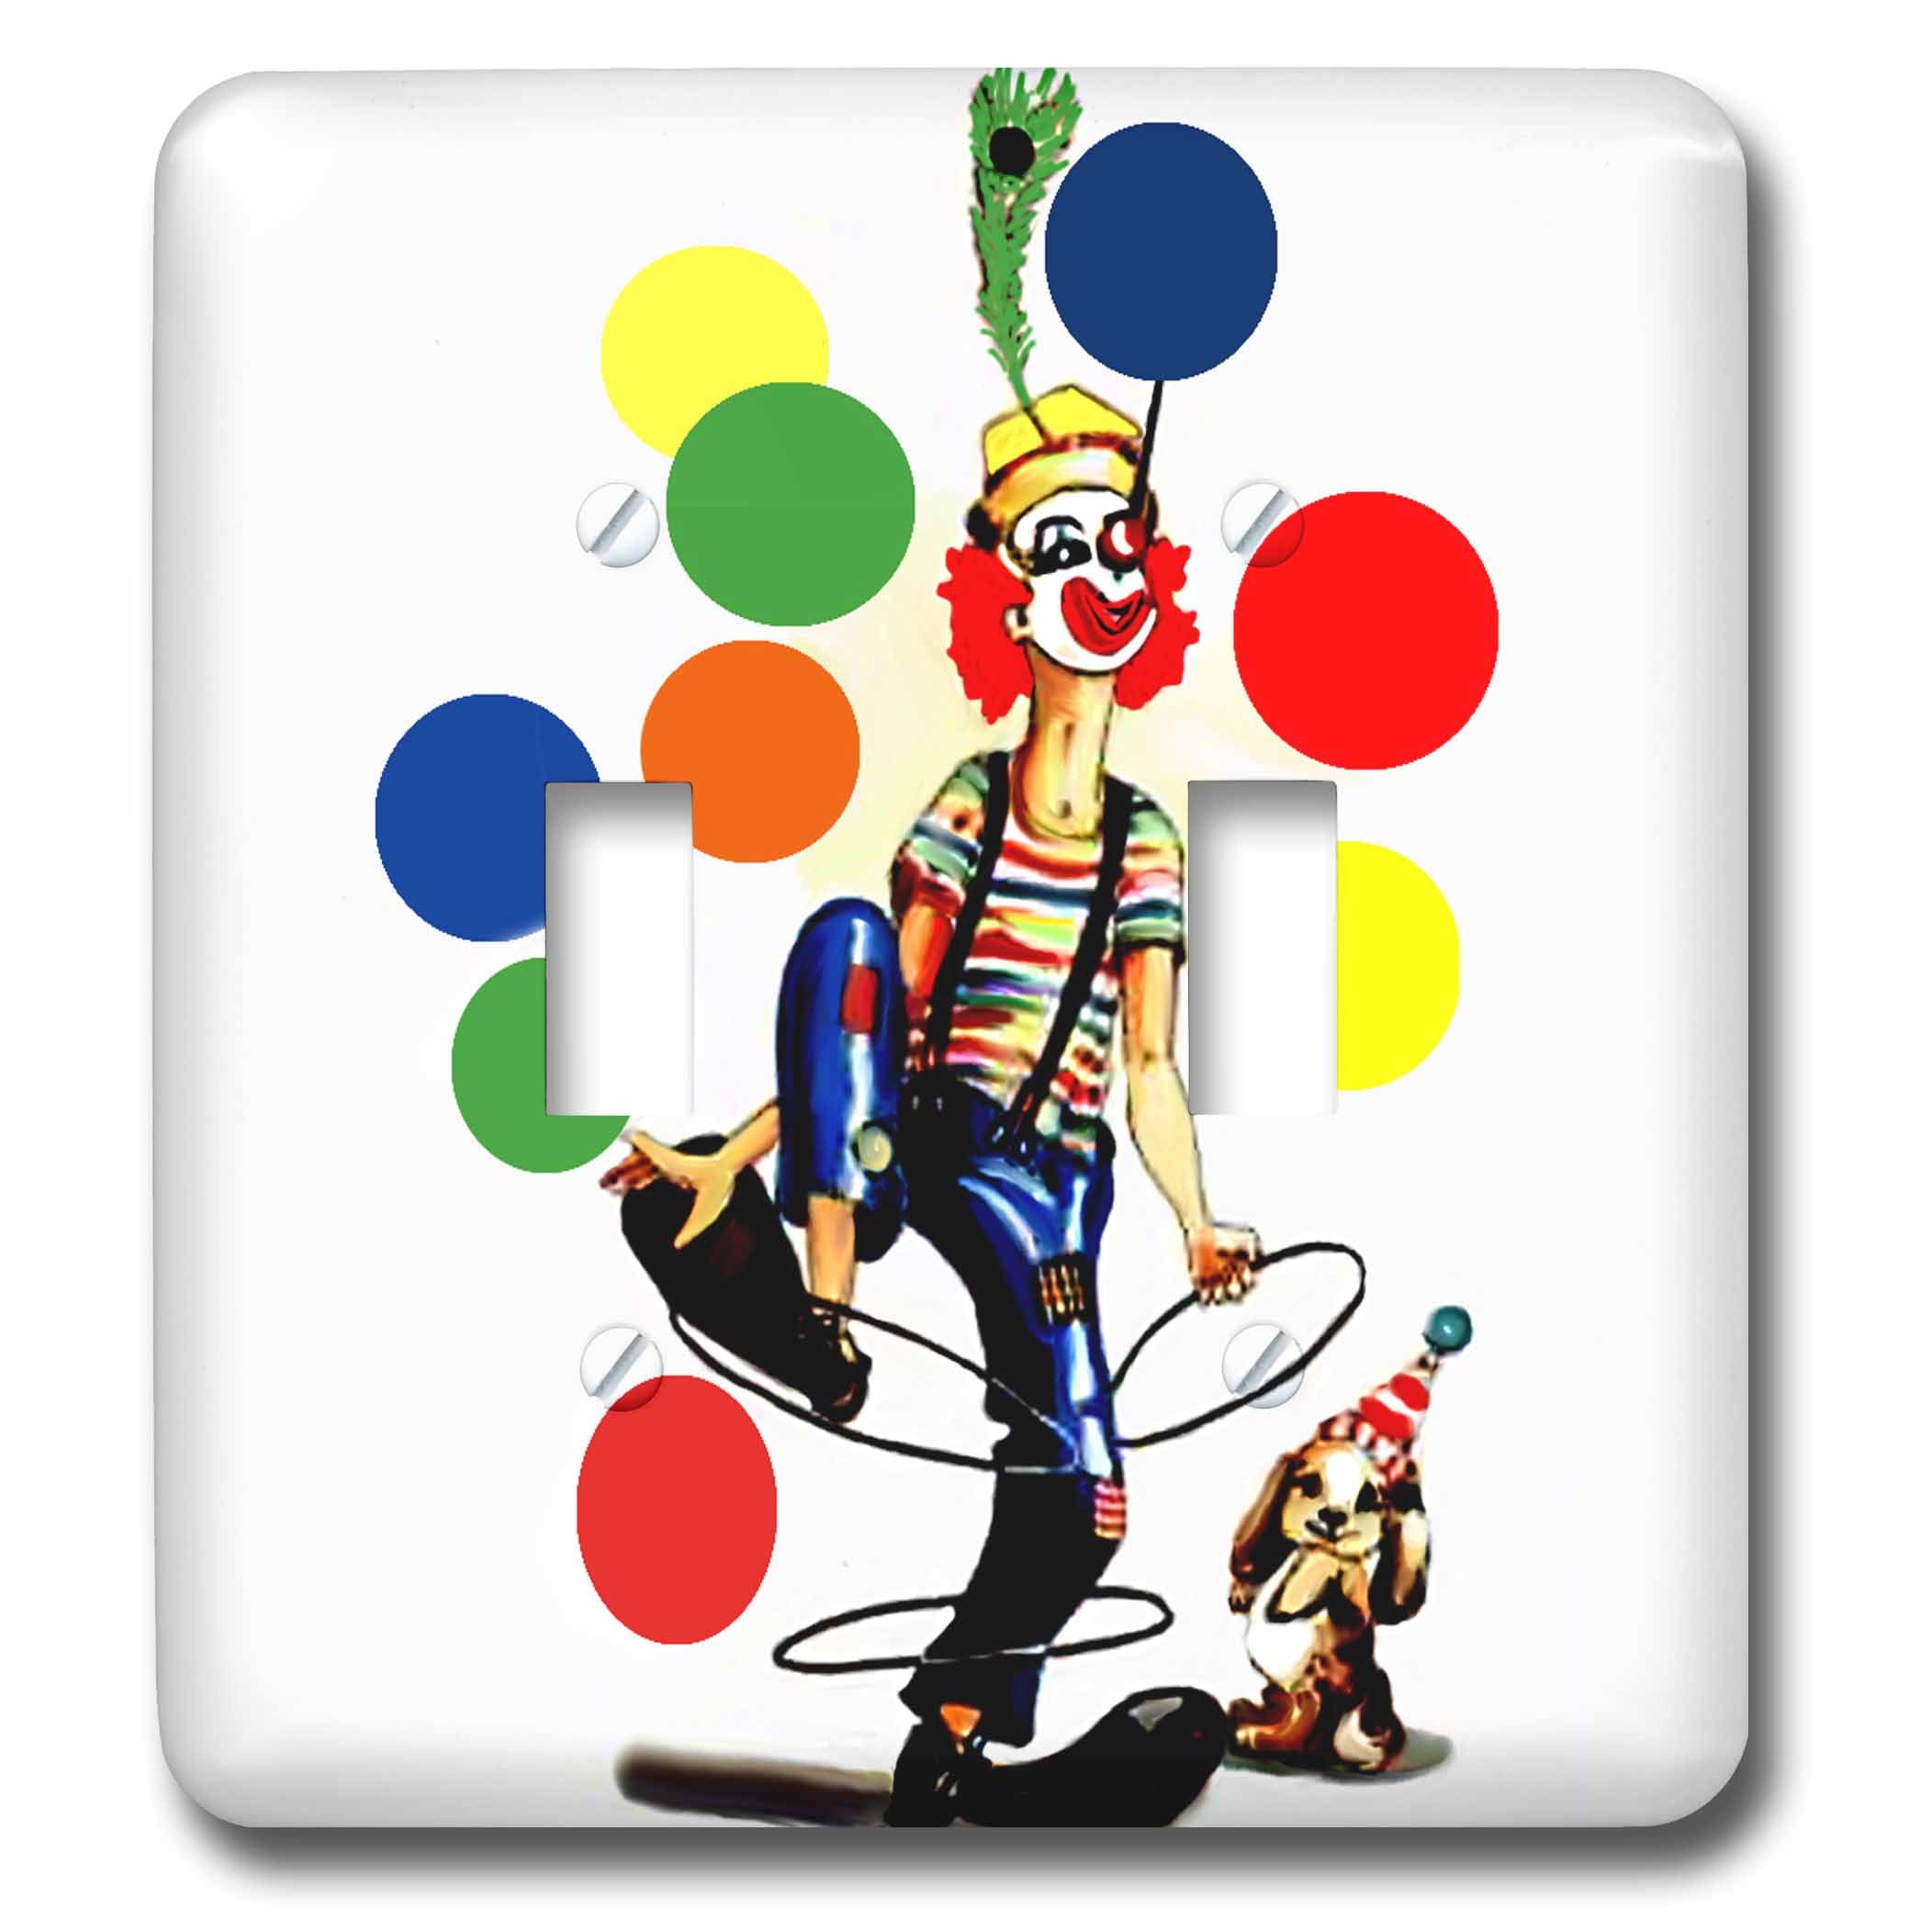 3dRose lsp_56072_2 Clown with Umbrella Double Toggle Switch